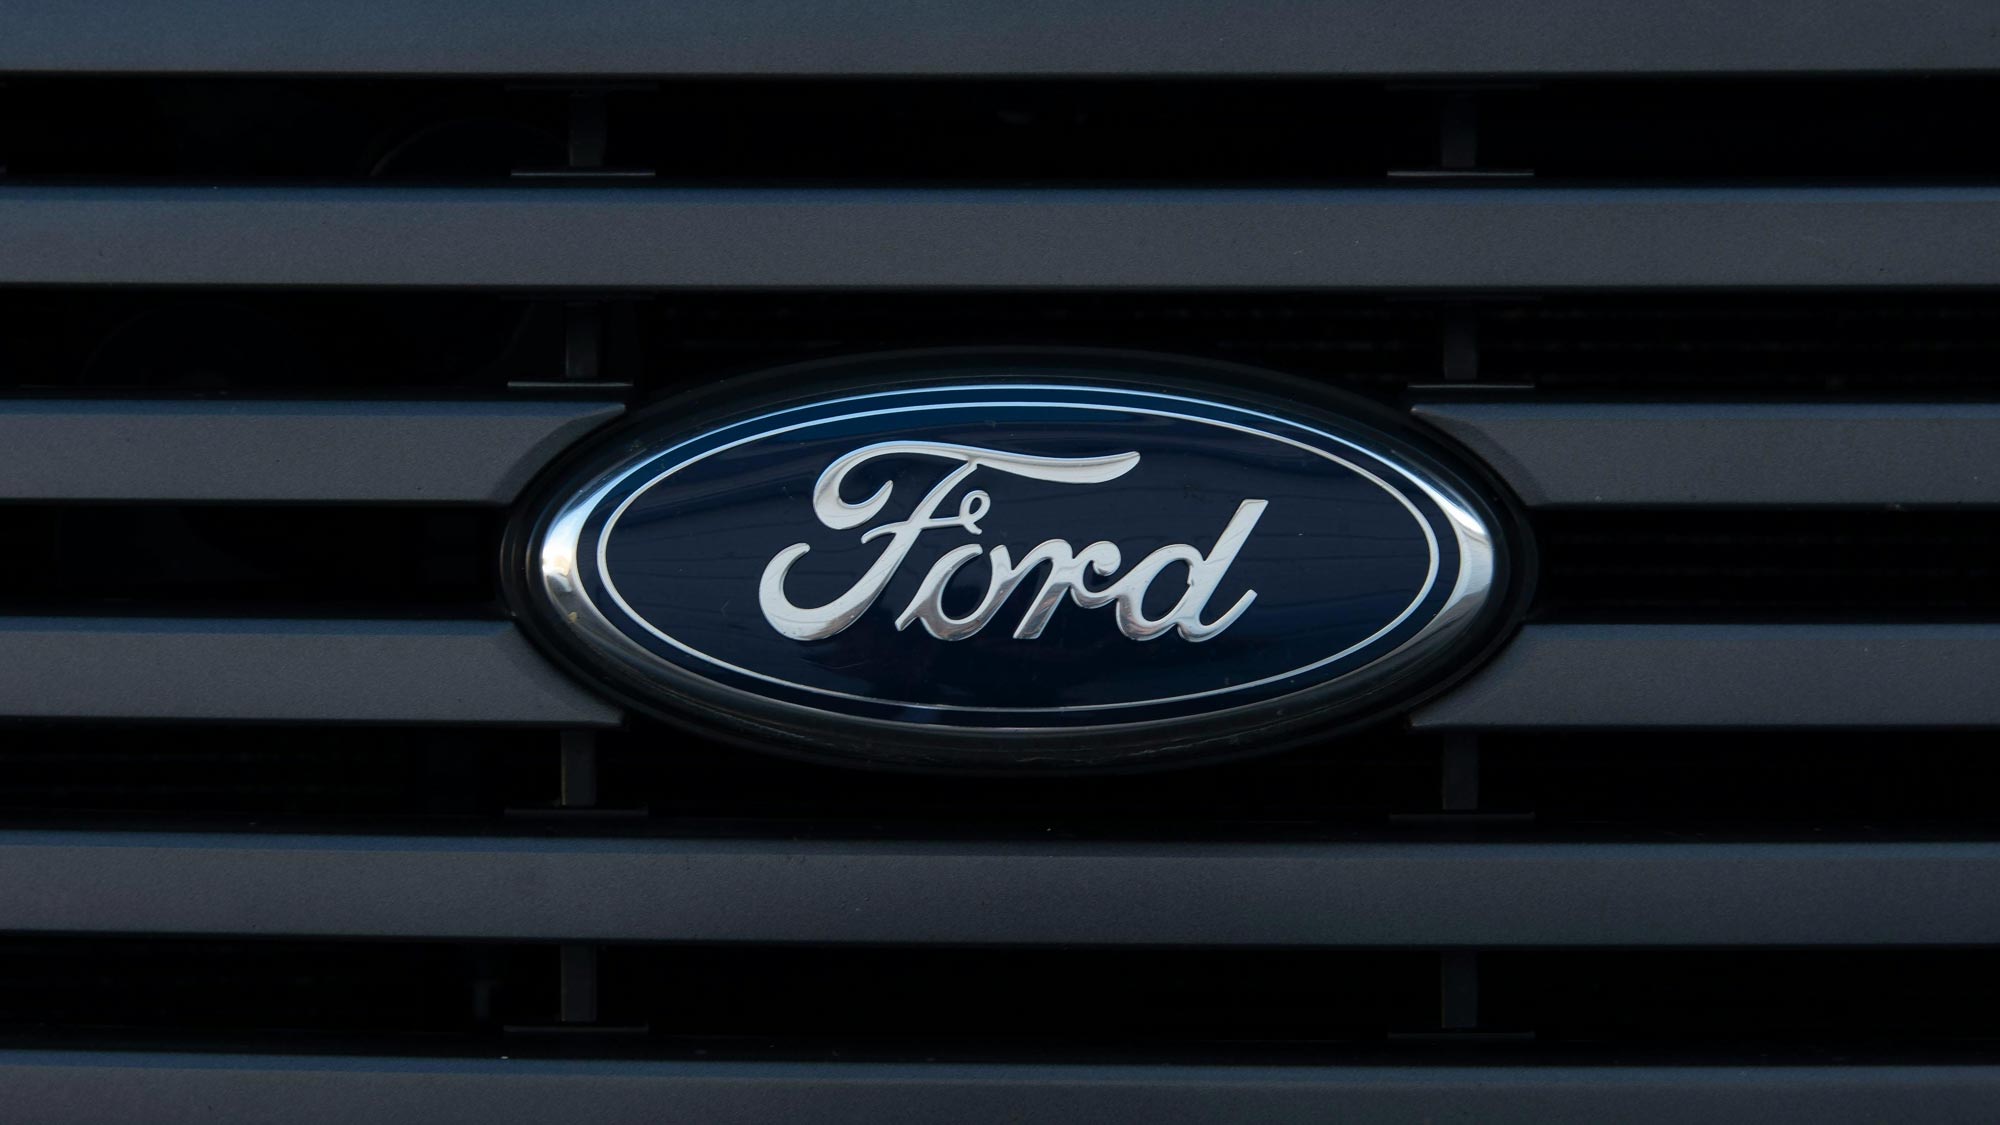 Ford: Salaried Employees to Return to Office Three Days a Week